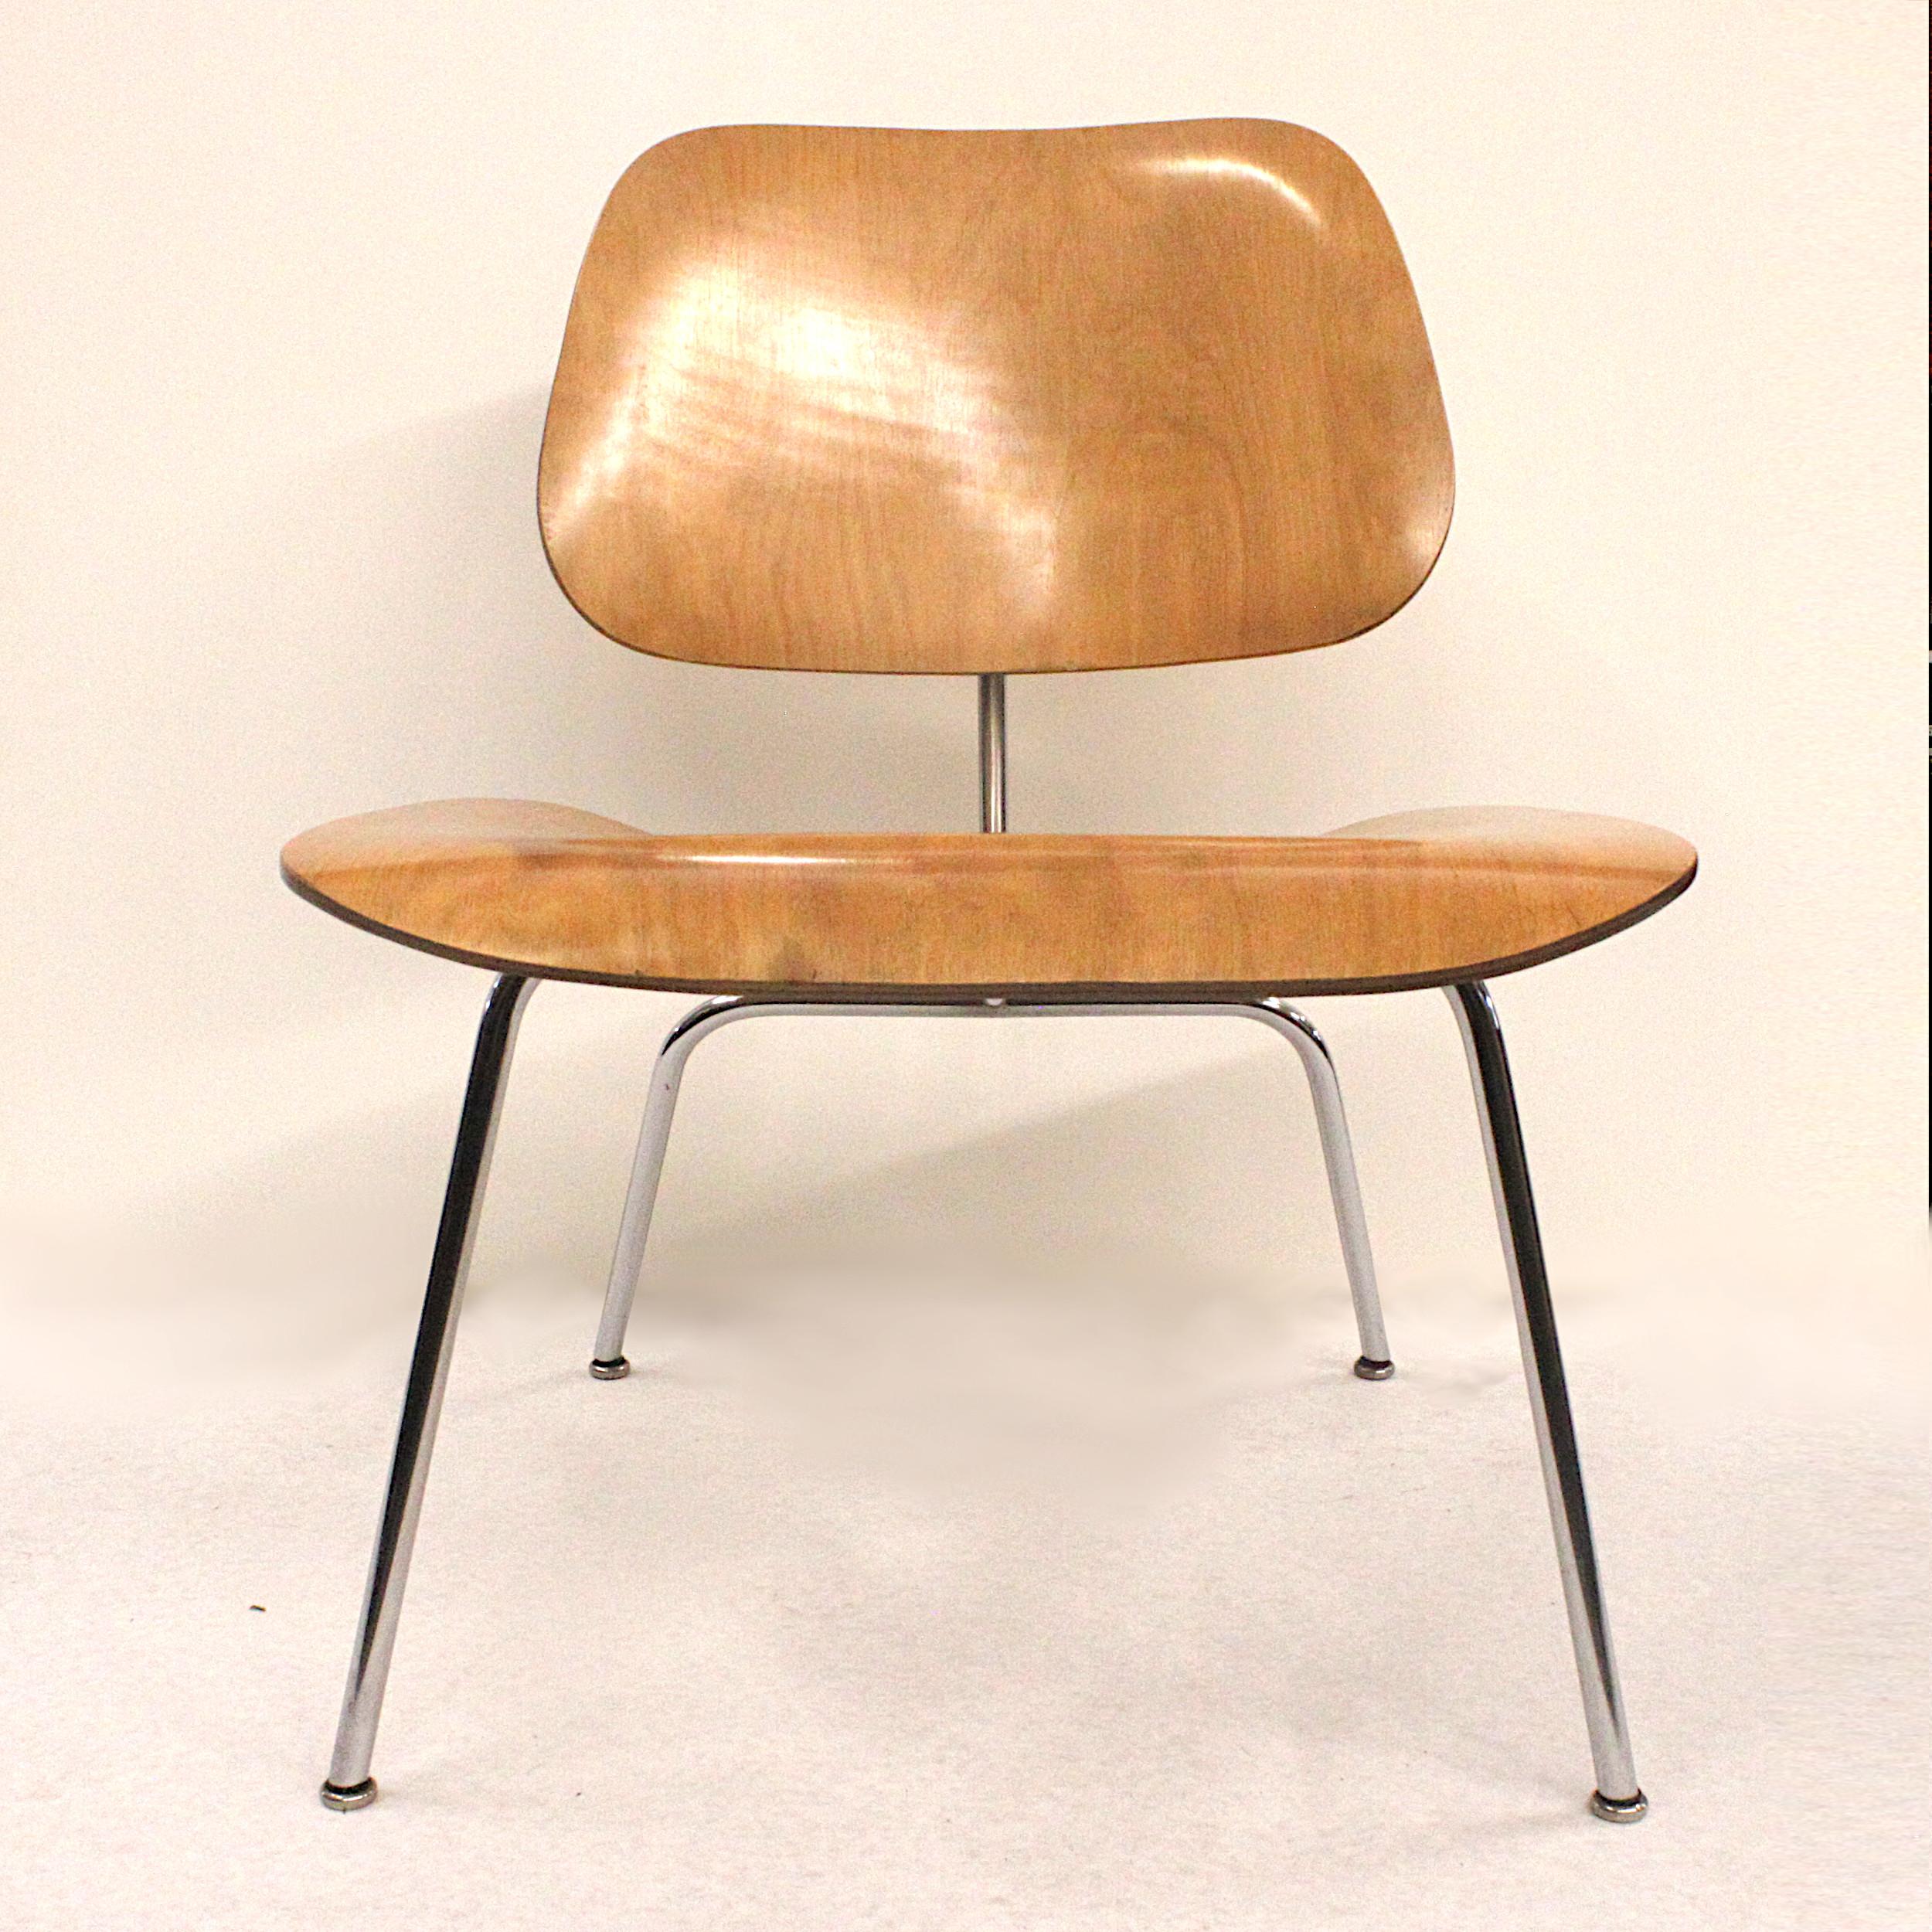 Laminated Early 1950s Mid-Century Modern Eames LCM Birch Lounge Chair by Herman Miller